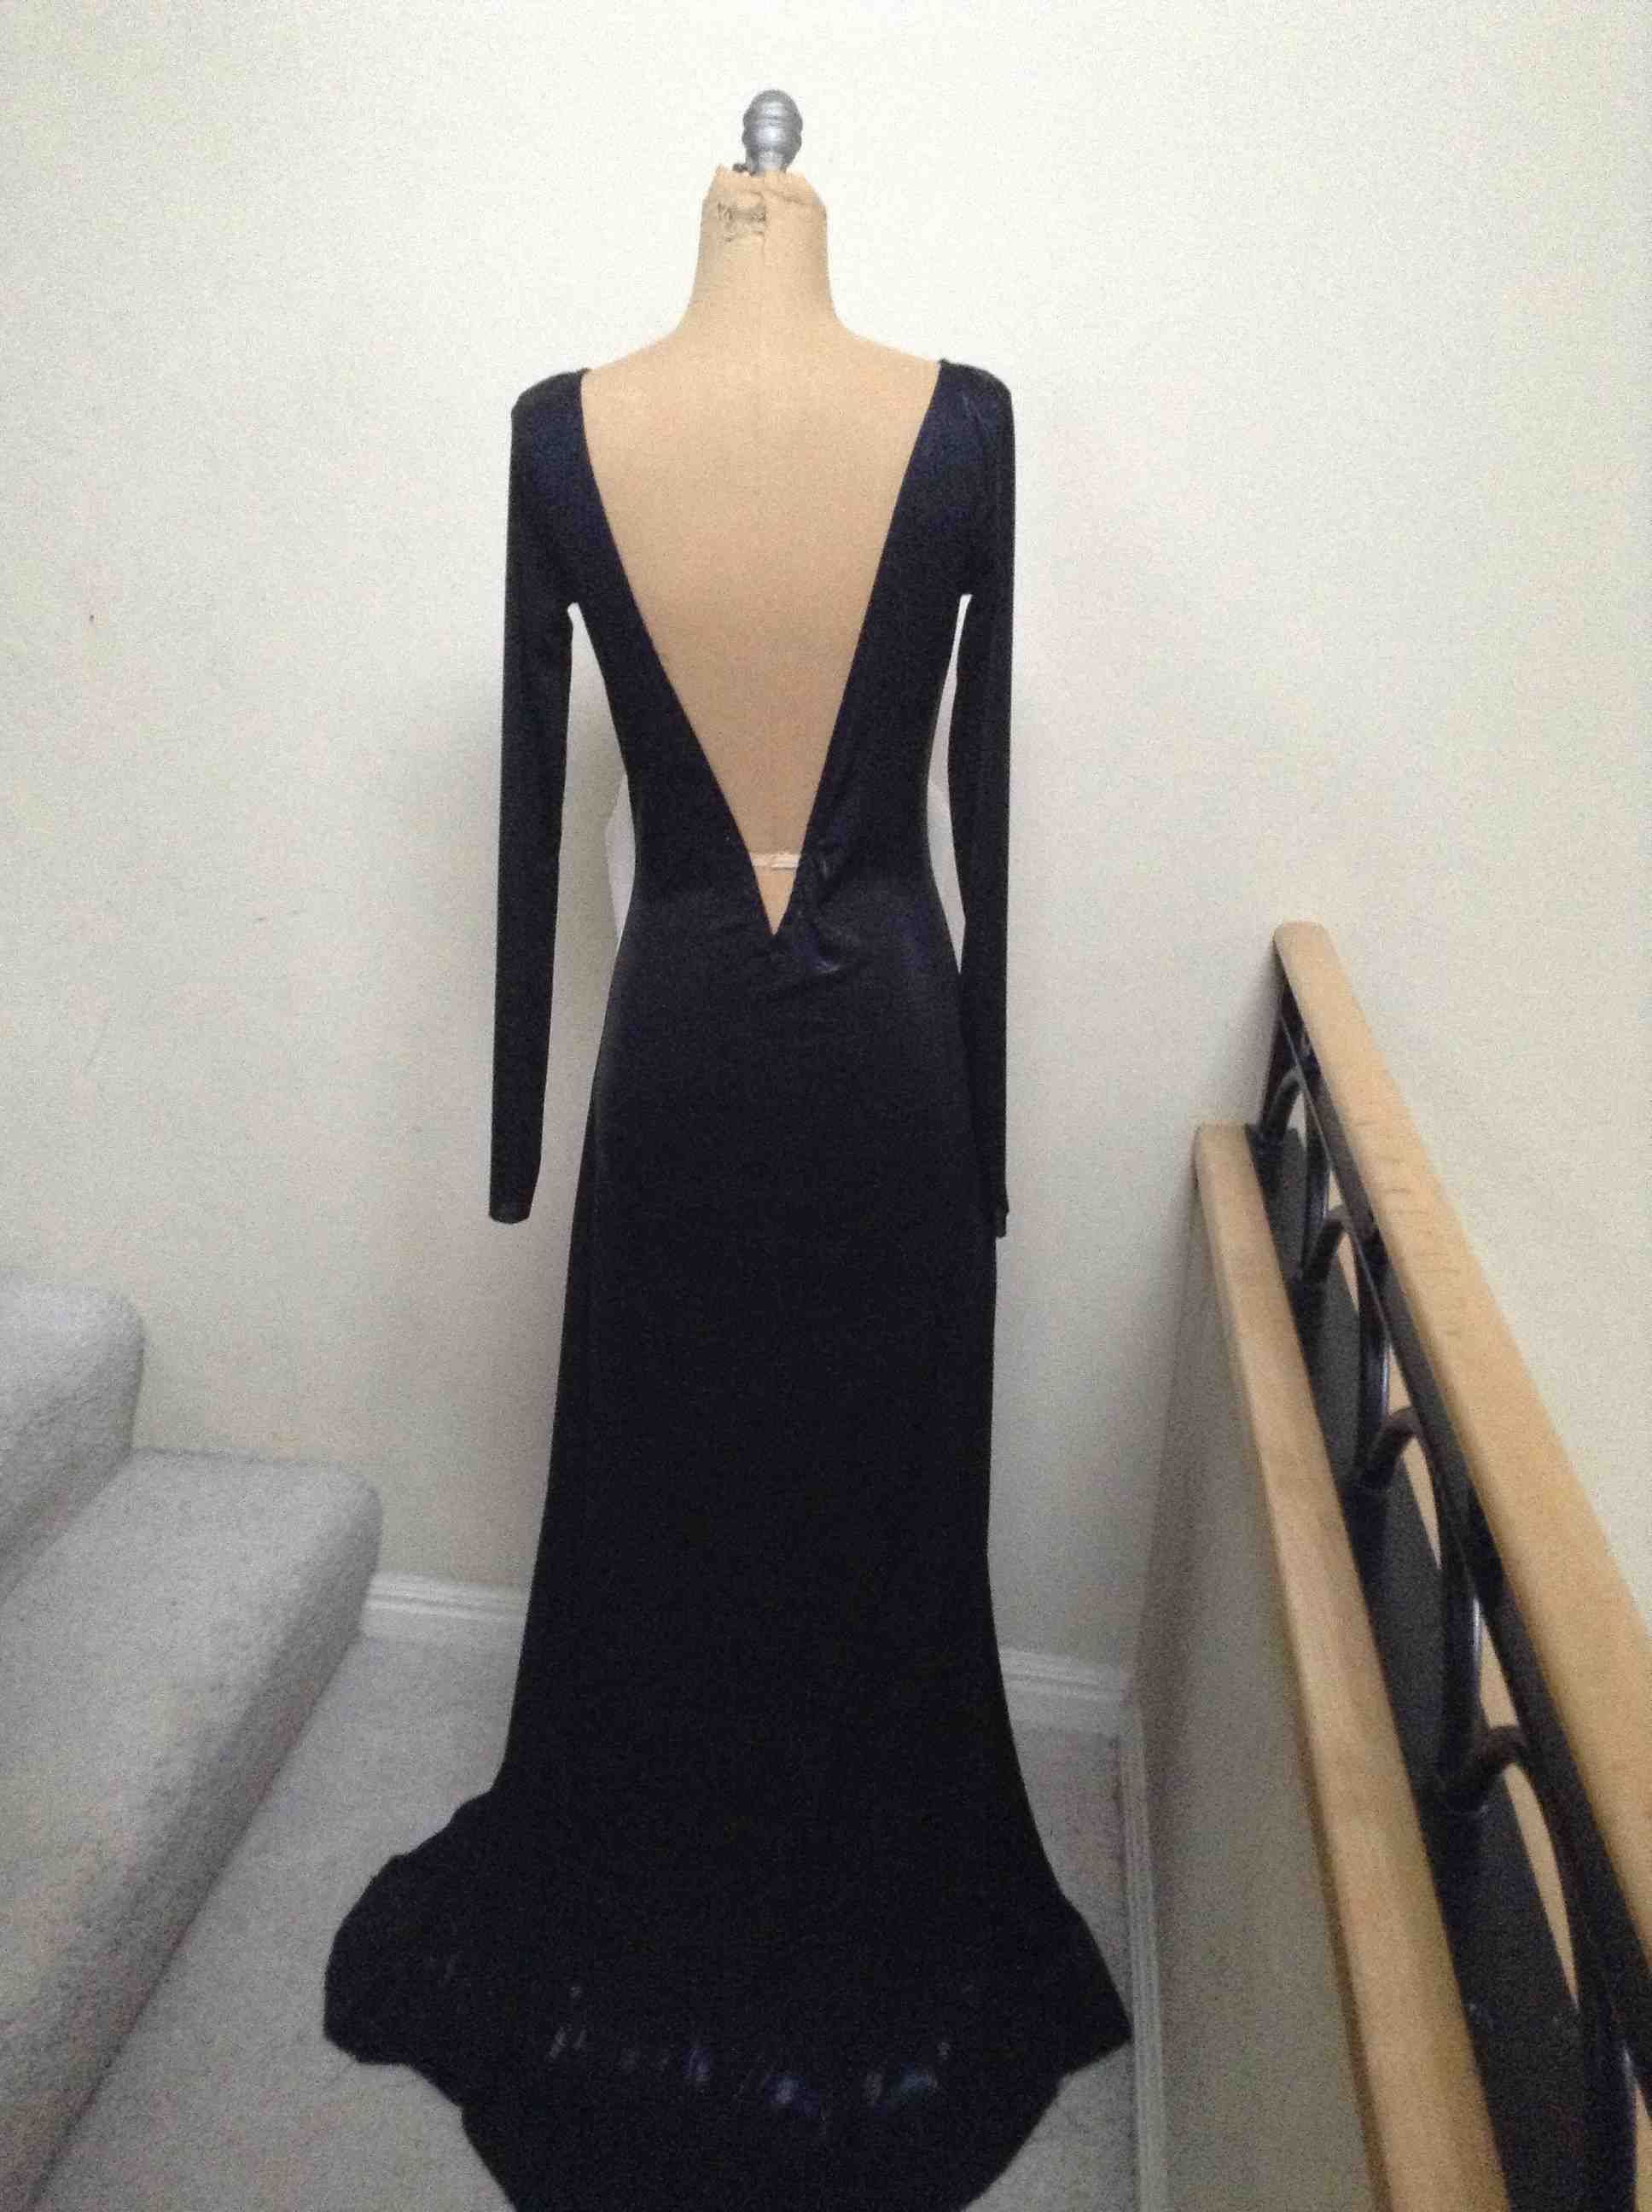 Buy Custom Made Black Shinny Prom Dress Made To Order From Darcy